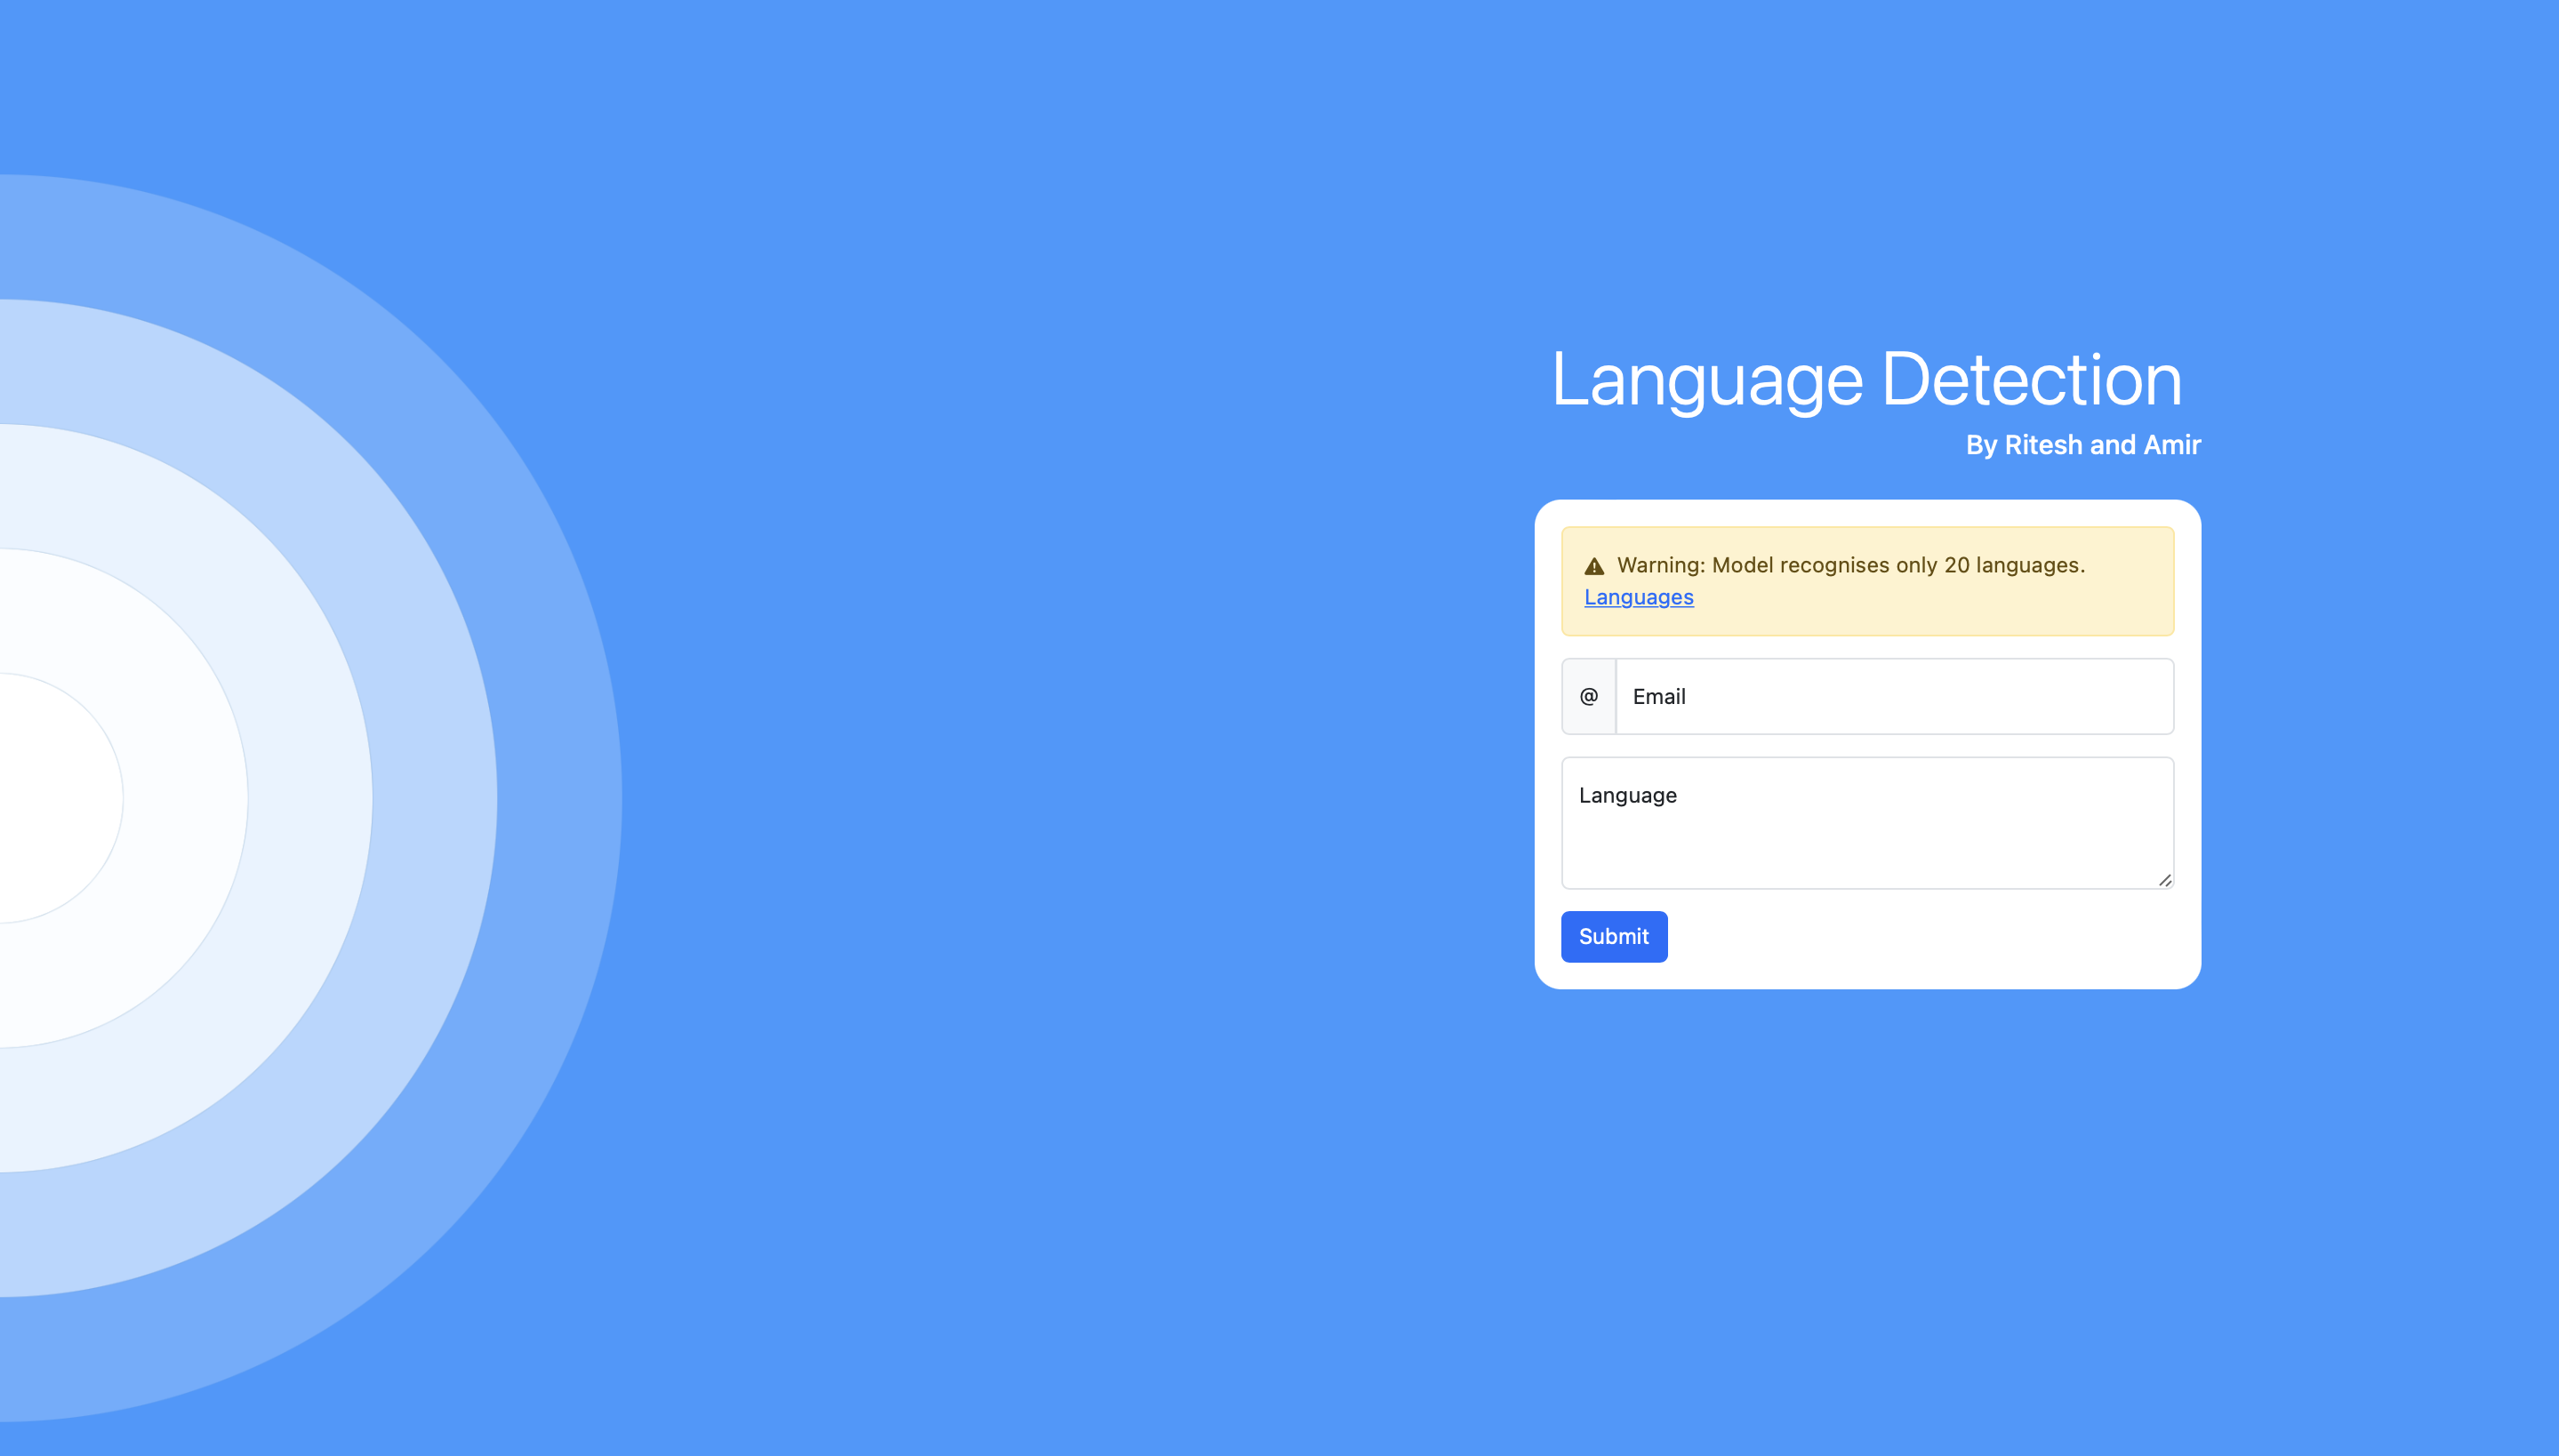 LinguaNet A Neural Network Based Language Identification System